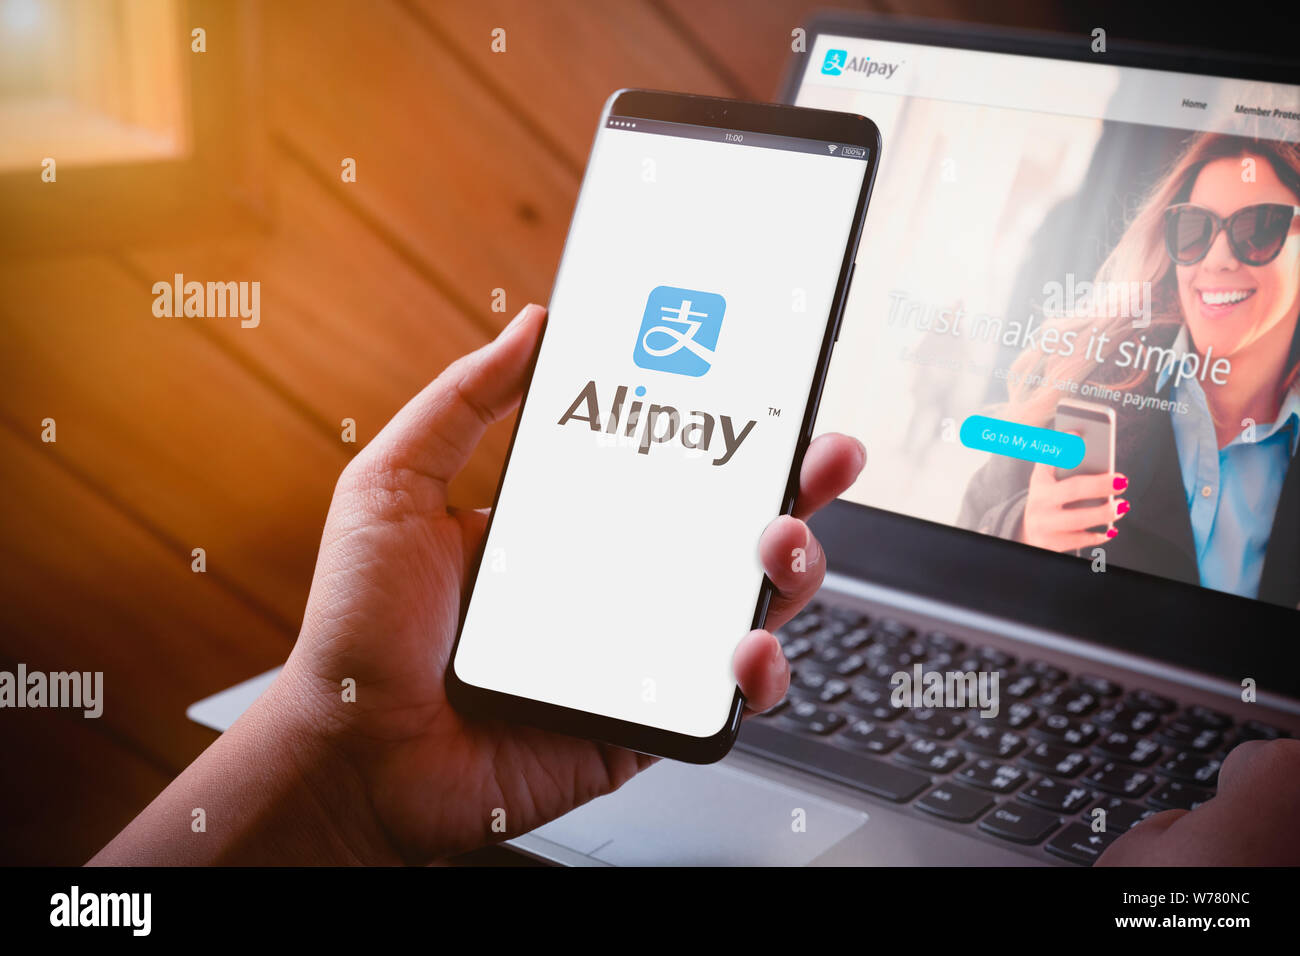 Bangkok, Thailand - August 5, 2019: Hands holding Smartphone with Alipay logo on screen and Alipay website on laptop background. Alipay is mobile and Stock Photo